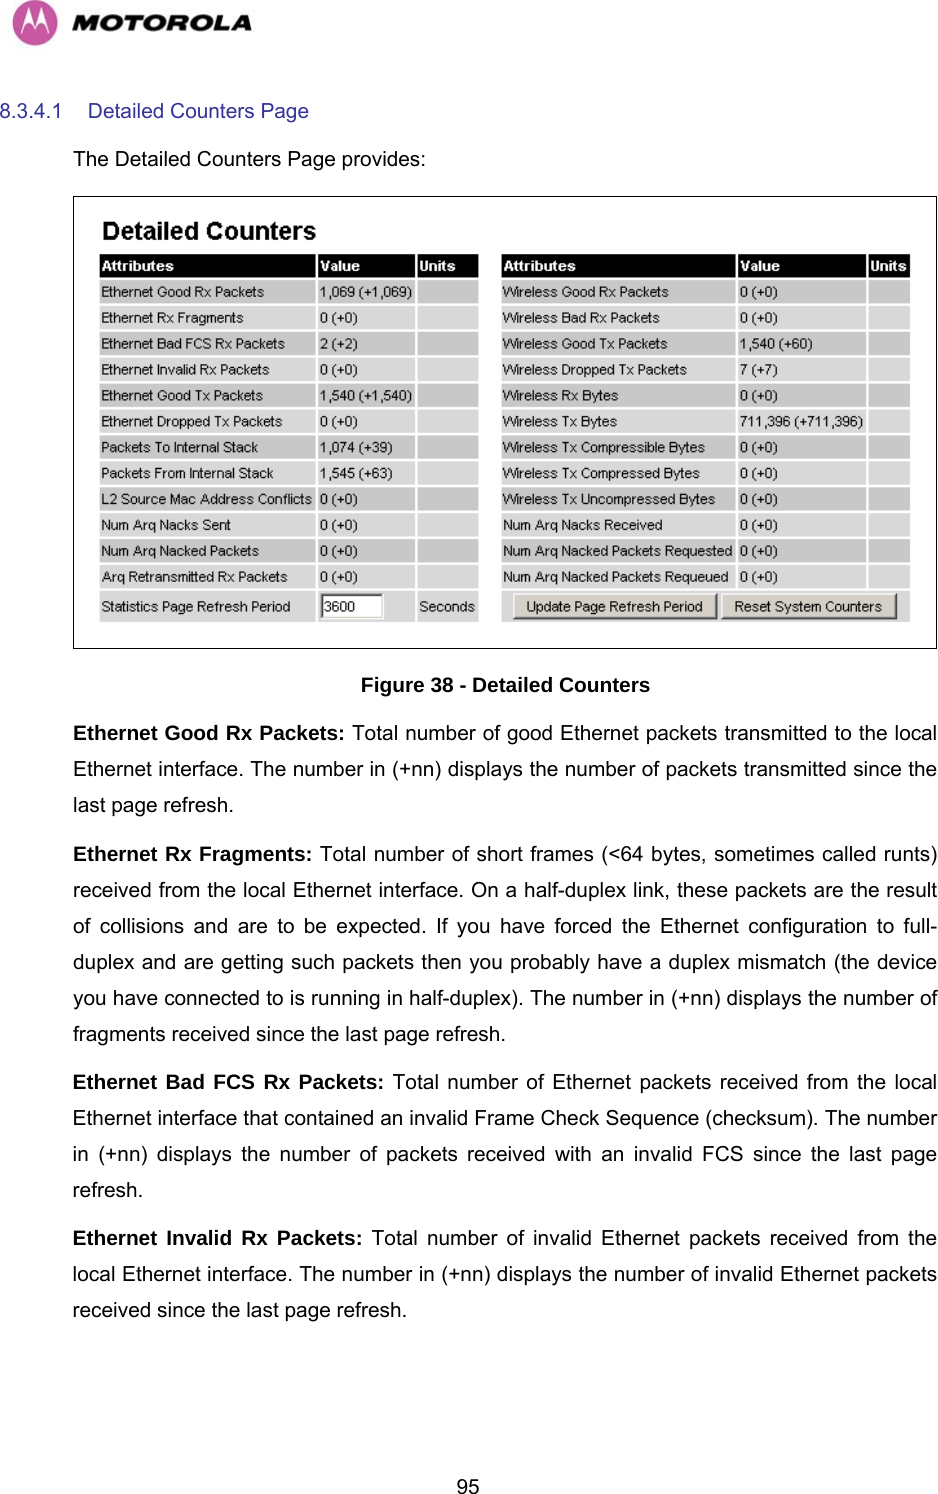   958.3.4.1  Detailed Counters Page The Detailed Counters Page provides:  Figure 38 - Detailed Counters Ethernet Good Rx Packets: Total number of good Ethernet packets transmitted to the local Ethernet interface. The number in (+nn) displays the number of packets transmitted since the last page refresh. Ethernet Rx Fragments: Total number of short frames (&lt;64 bytes, sometimes called runts) received from the local Ethernet interface. On a half-duplex link, these packets are the result of collisions and are to be expected. If you have forced the Ethernet configuration to full-duplex and are getting such packets then you probably have a duplex mismatch (the device you have connected to is running in half-duplex). The number in (+nn) displays the number of fragments received since the last page refresh. Ethernet Bad FCS Rx Packets: Total number of Ethernet packets received from the local Ethernet interface that contained an invalid Frame Check Sequence (checksum). The number in (+nn) displays the number of packets received with an invalid FCS since the last page refresh. Ethernet Invalid Rx Packets: Total number of invalid Ethernet packets received from the local Ethernet interface. The number in (+nn) displays the number of invalid Ethernet packets received since the last page refresh. 